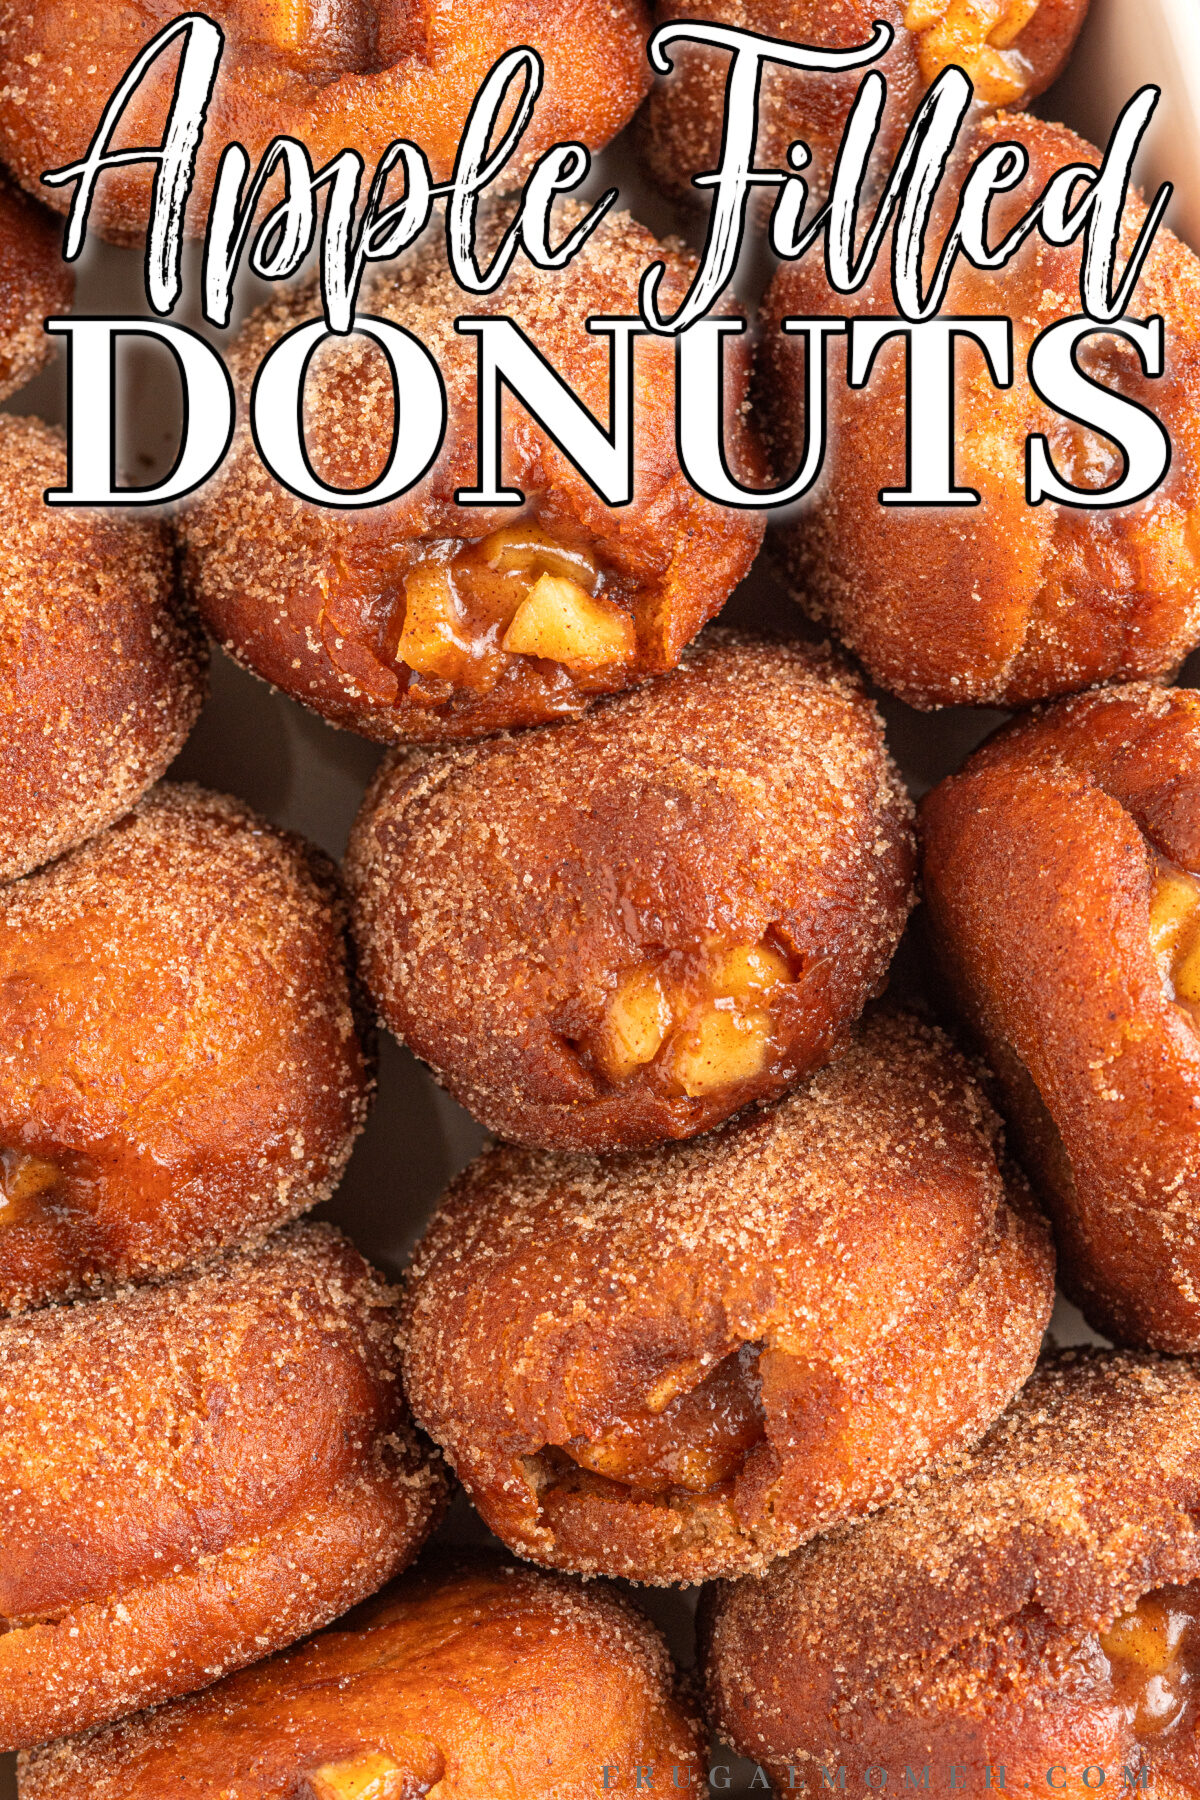 Inspired by classic apple pie, these apple filled donuts are fried to golden perfection and tossed in cinnamon sugar for a sweet finish.